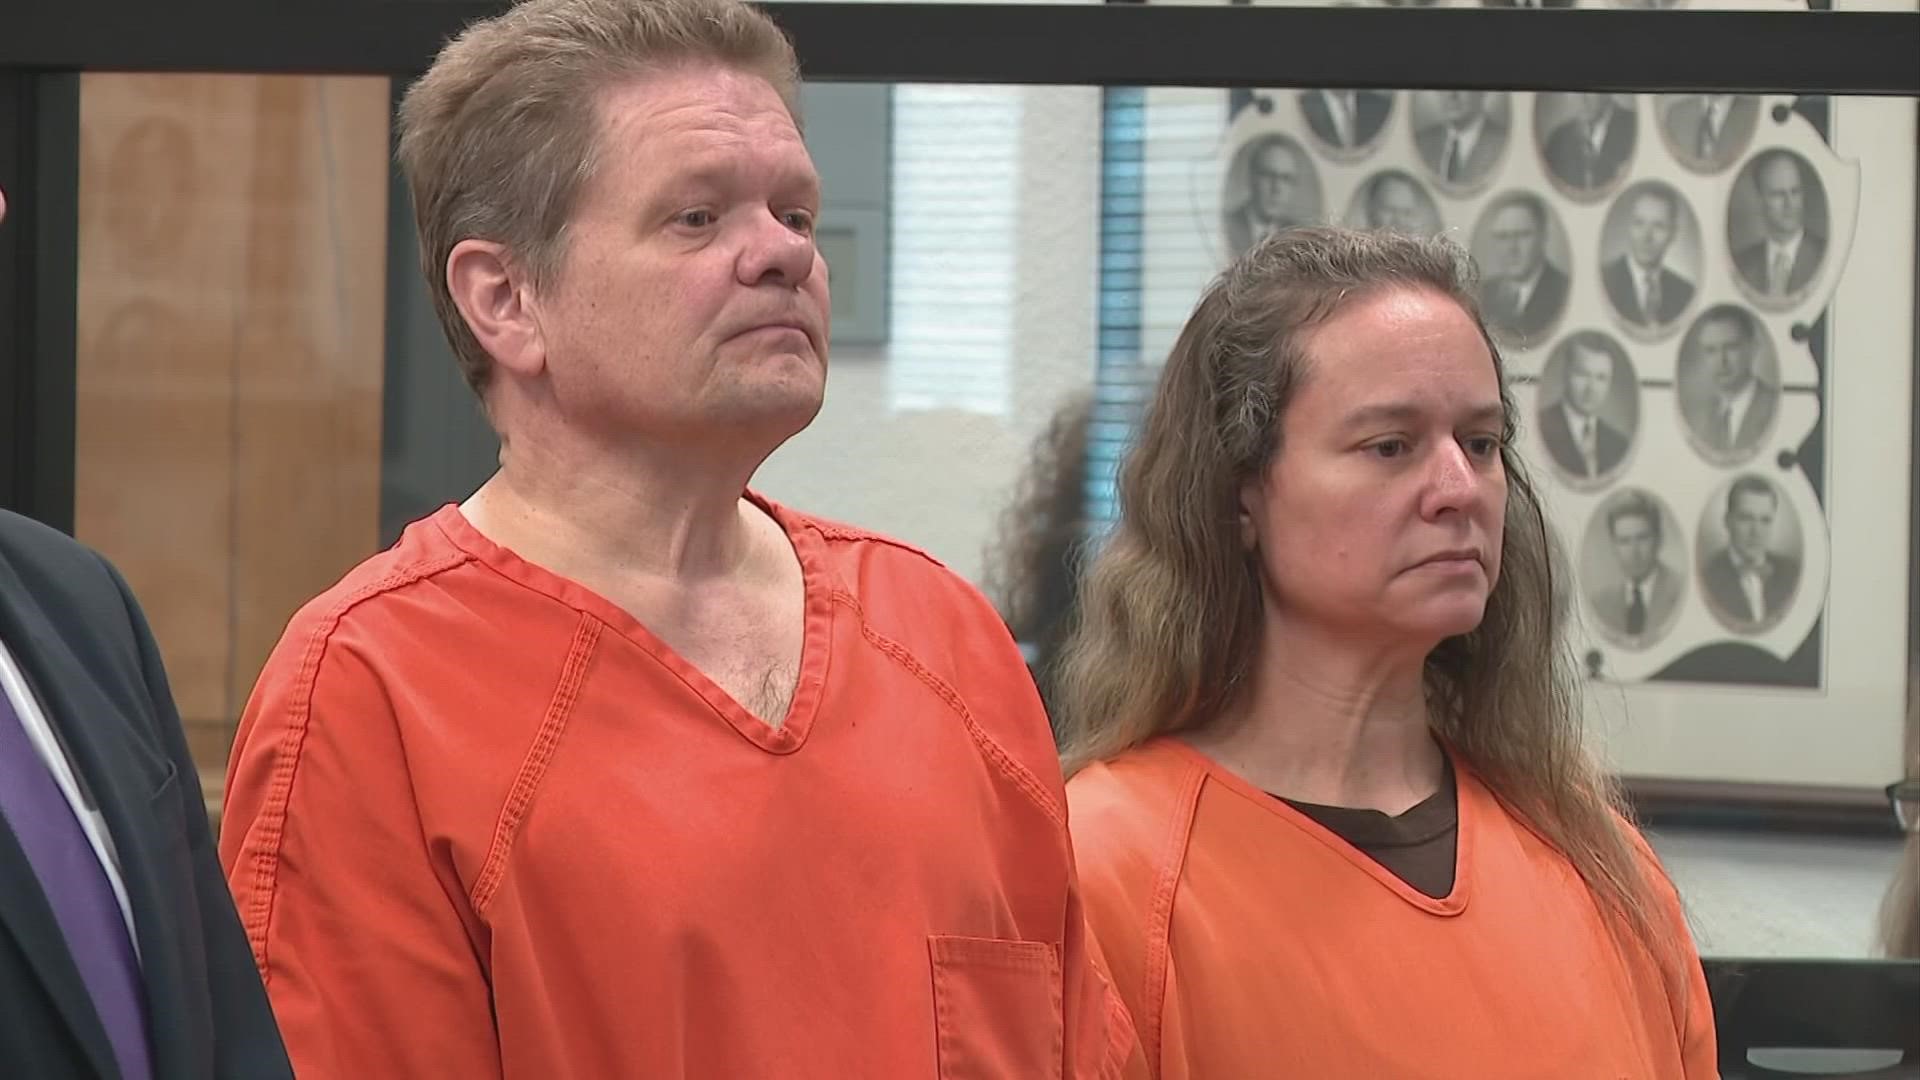 Robert and Deborah Bellar pleaded guilty to engaging in a pattern of corrupt activity and endangering children.